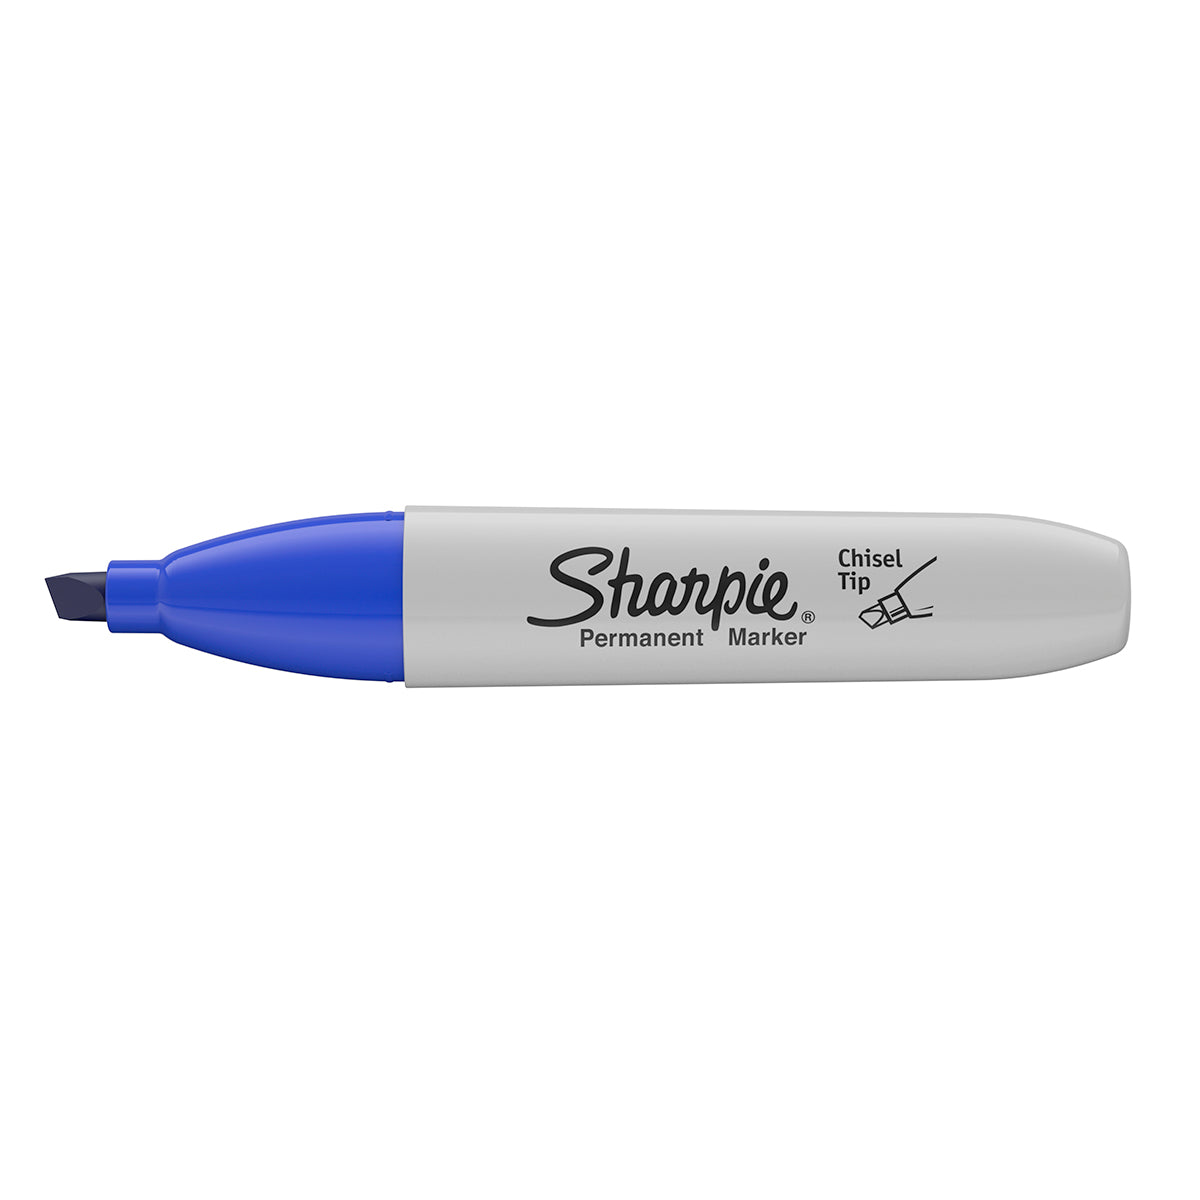 Sharpie Chisel Tip Markers and Sets